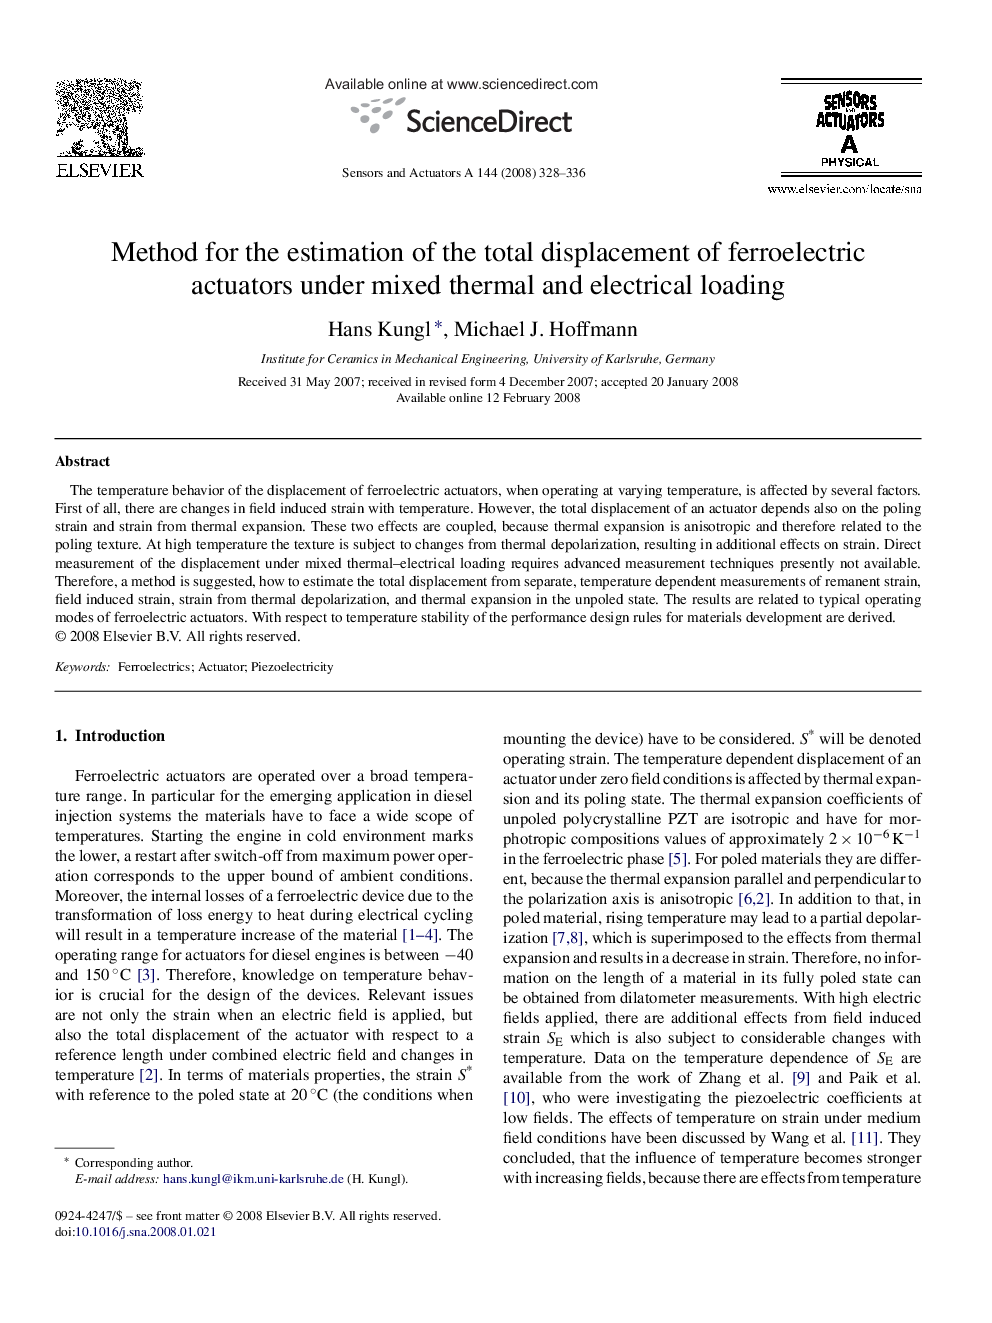 Method for the estimation of the total displacement of ferroelectric actuators under mixed thermal and electrical loading